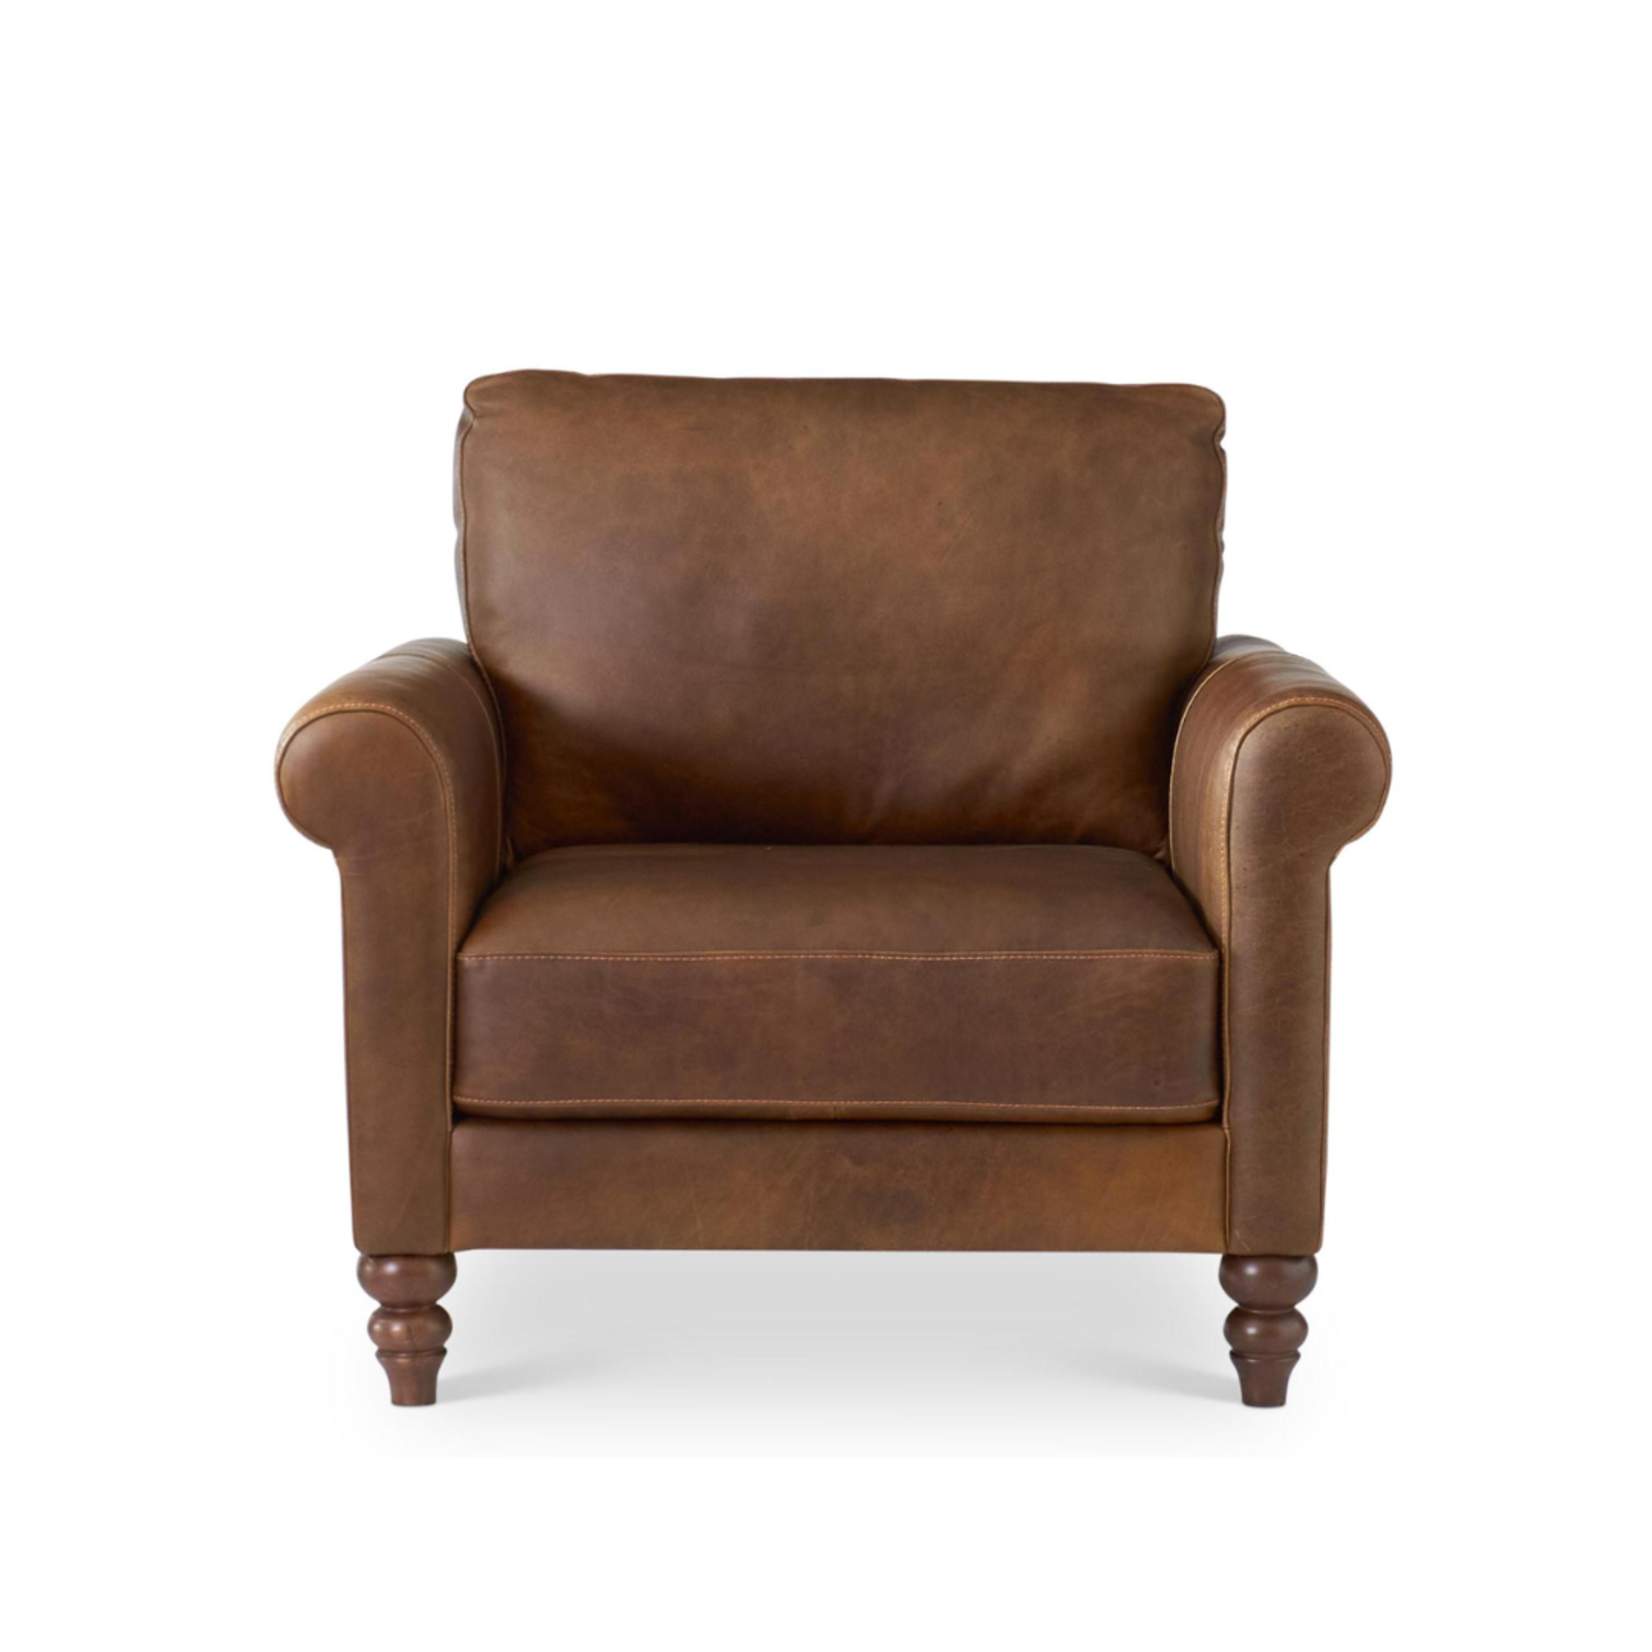 Italian Leather Arm Chair, LT Tobacco Brown